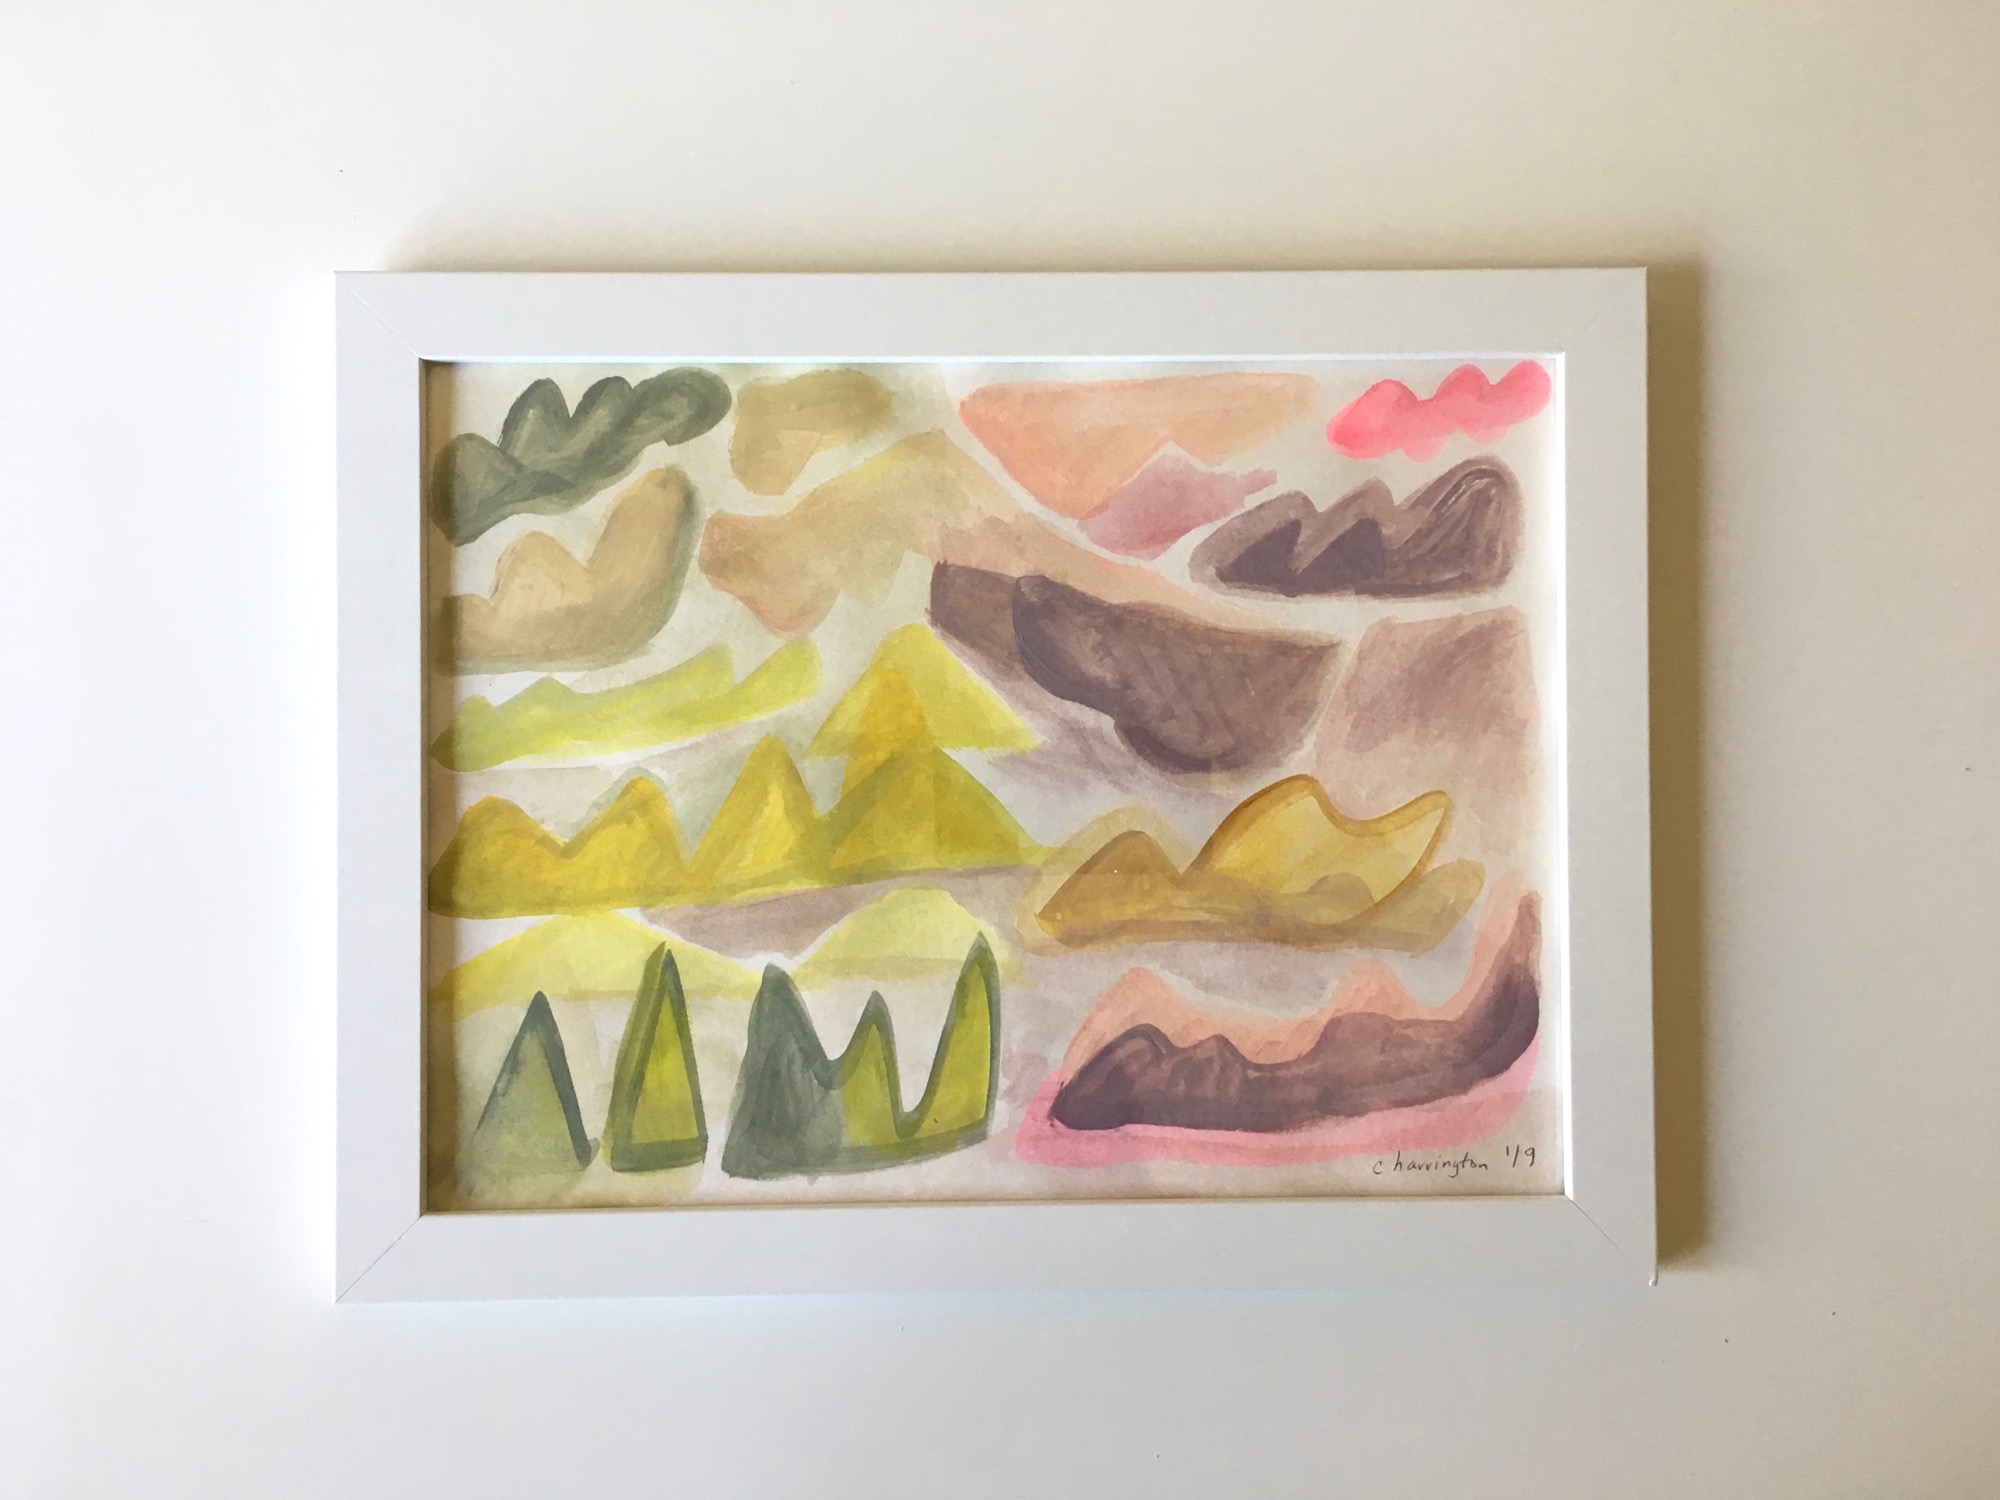 The Pastel Hills, Watercolor and Acrylic on Watercolor Paper, 9 x 12 inches, 2019